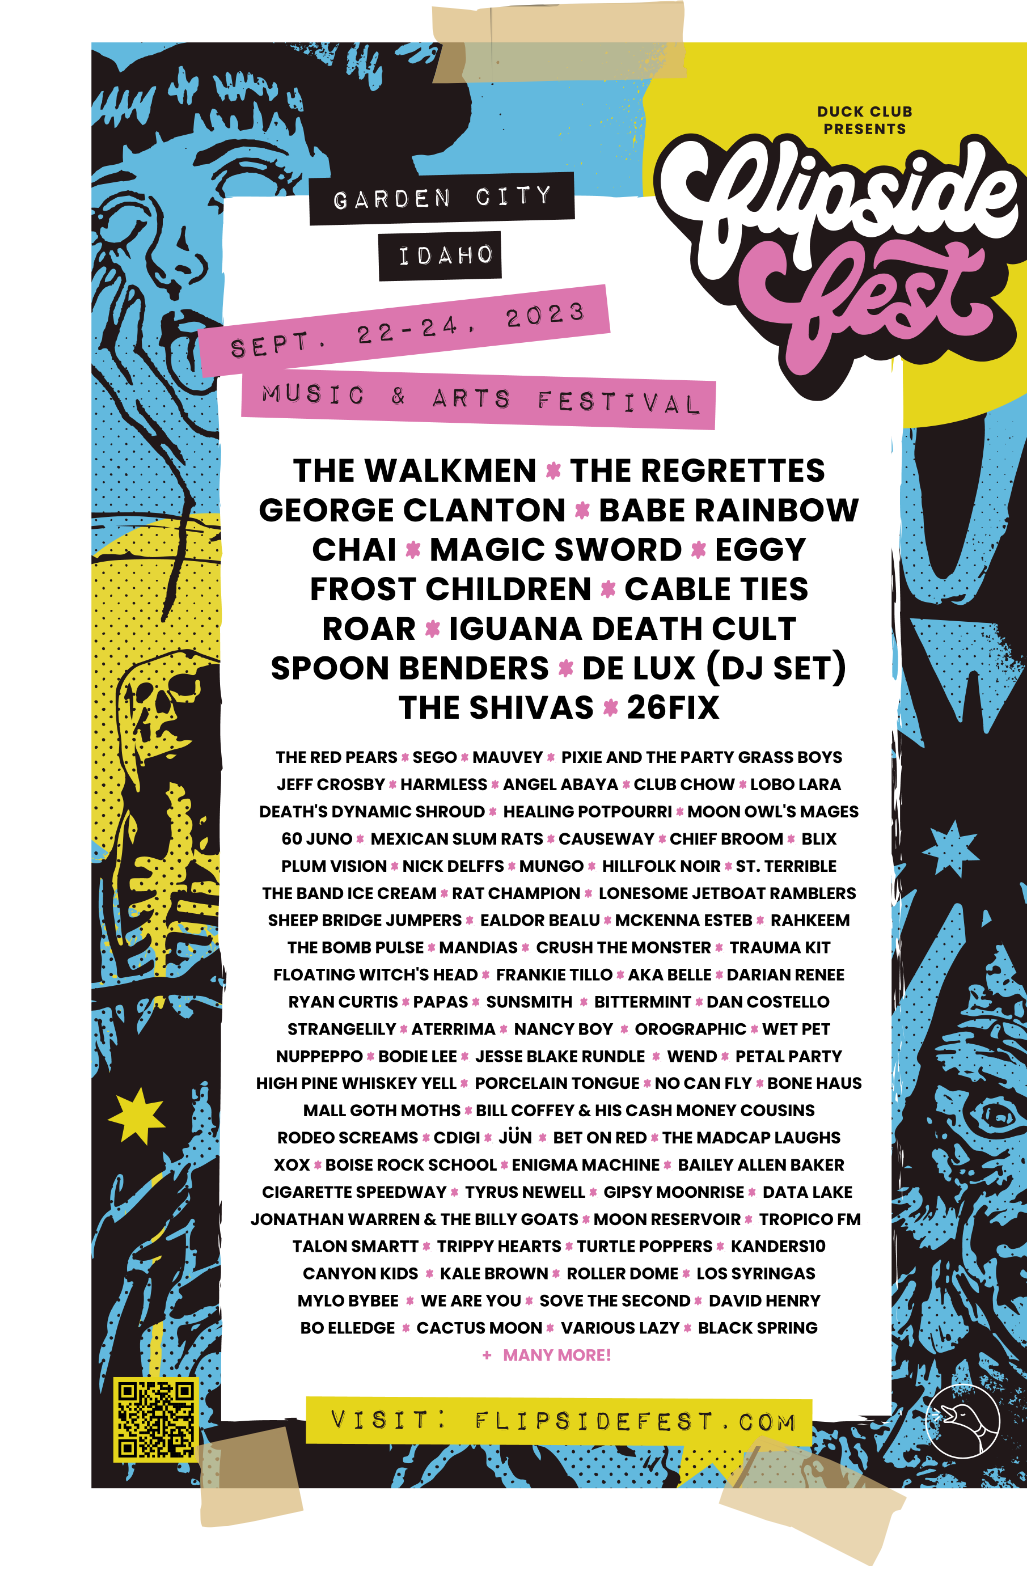 flipside fest lineup poster, with The Walkmen, The Regrettes, and others